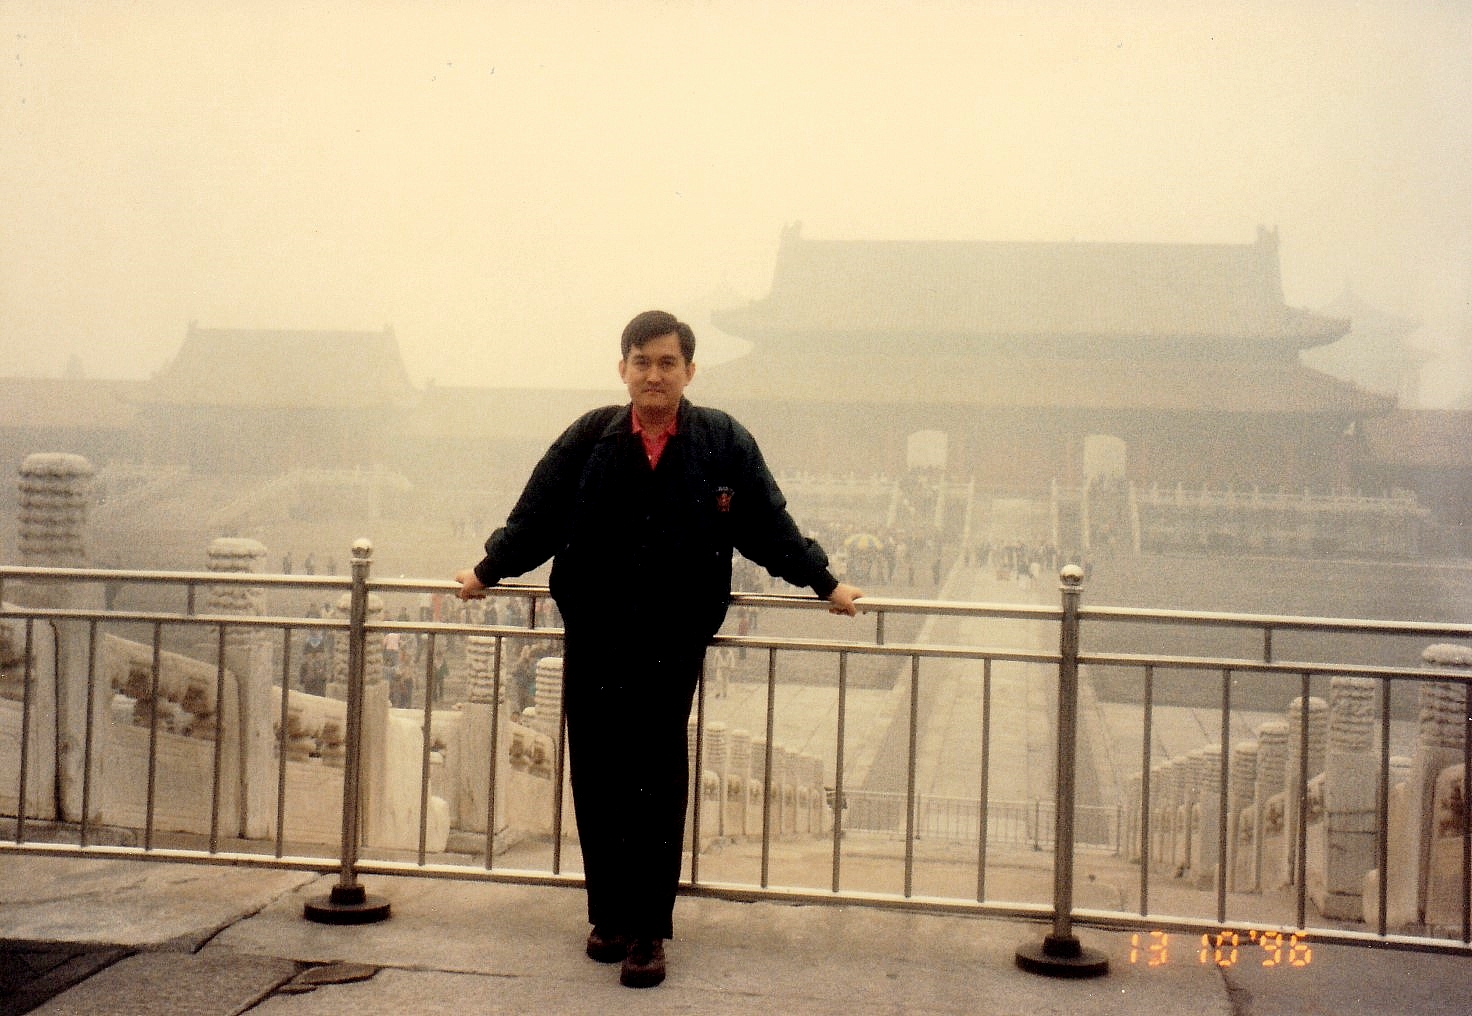 Our Travel Adventures: 1996 - Beijing, Chende and Tianjin